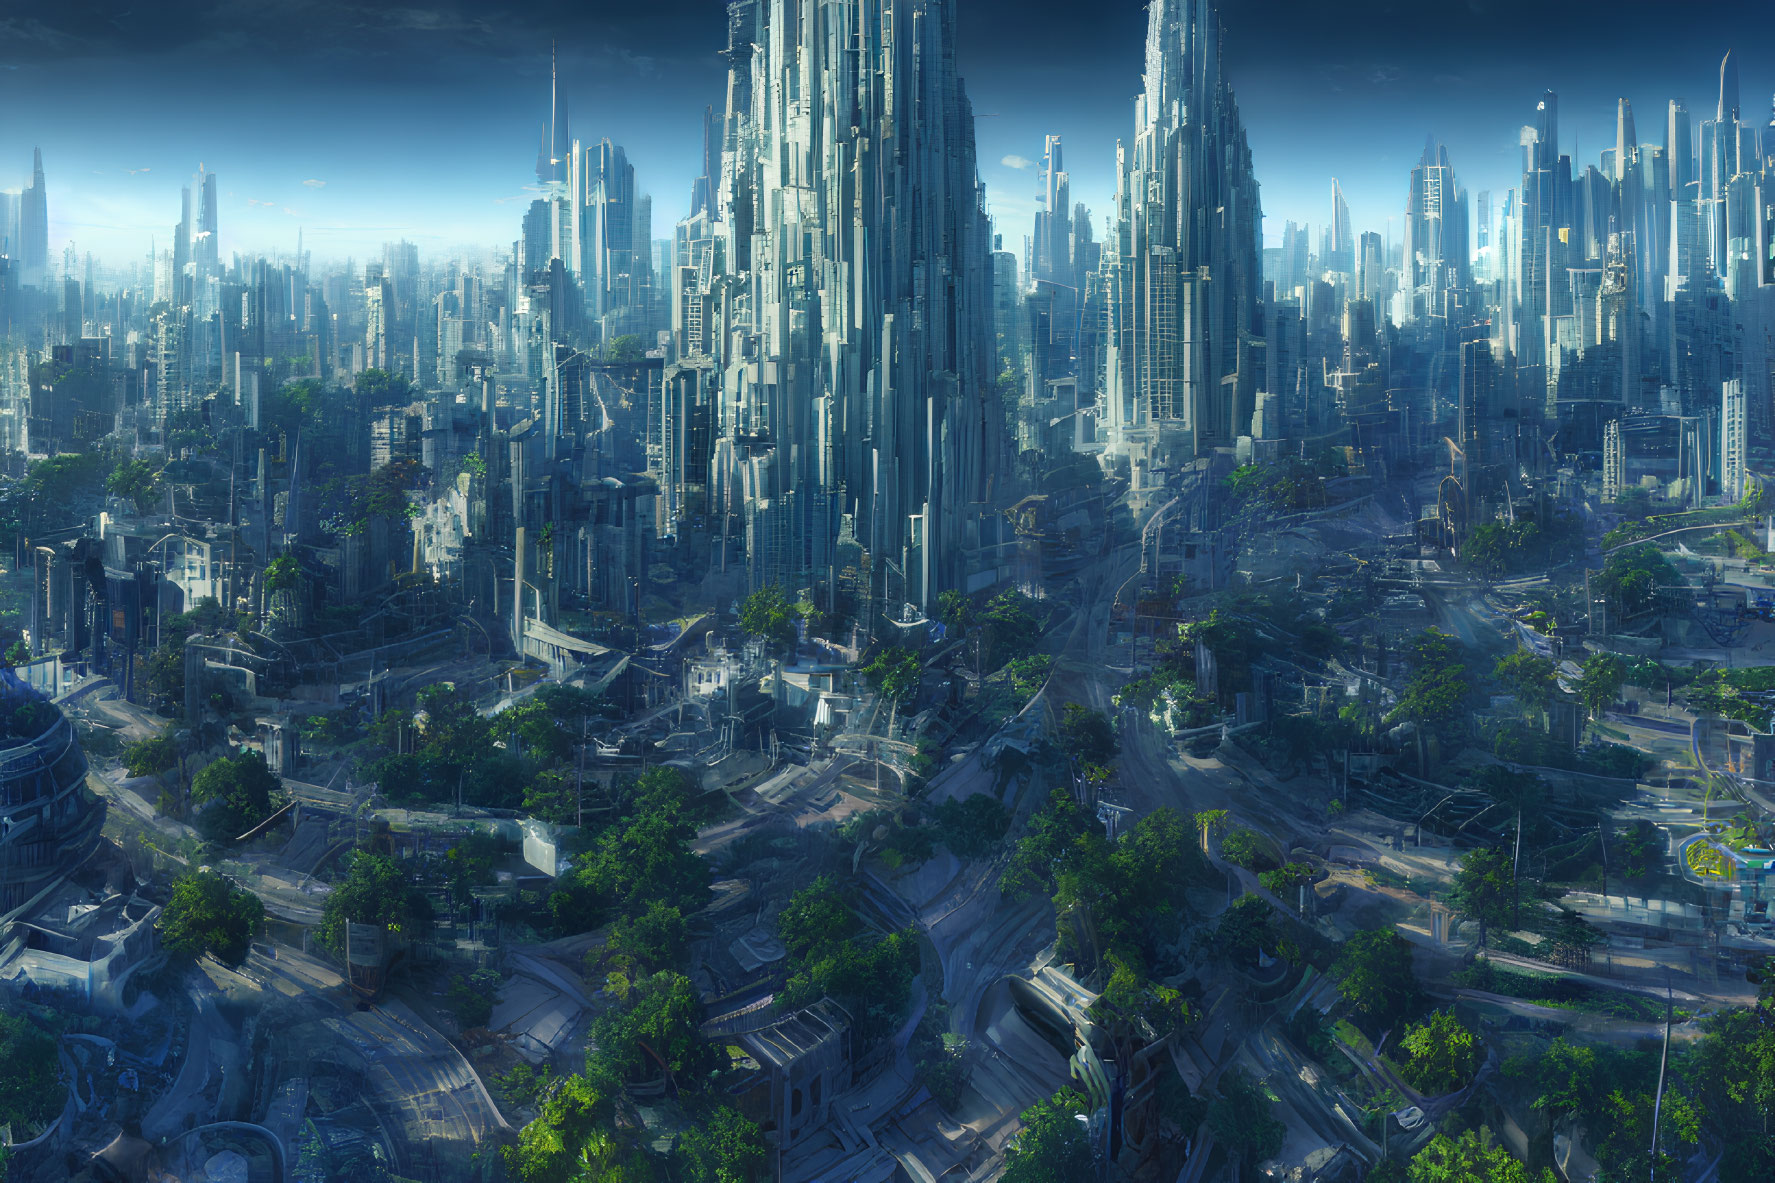 Futuristic cityscape with skyscrapers, greenery, and advanced infrastructure